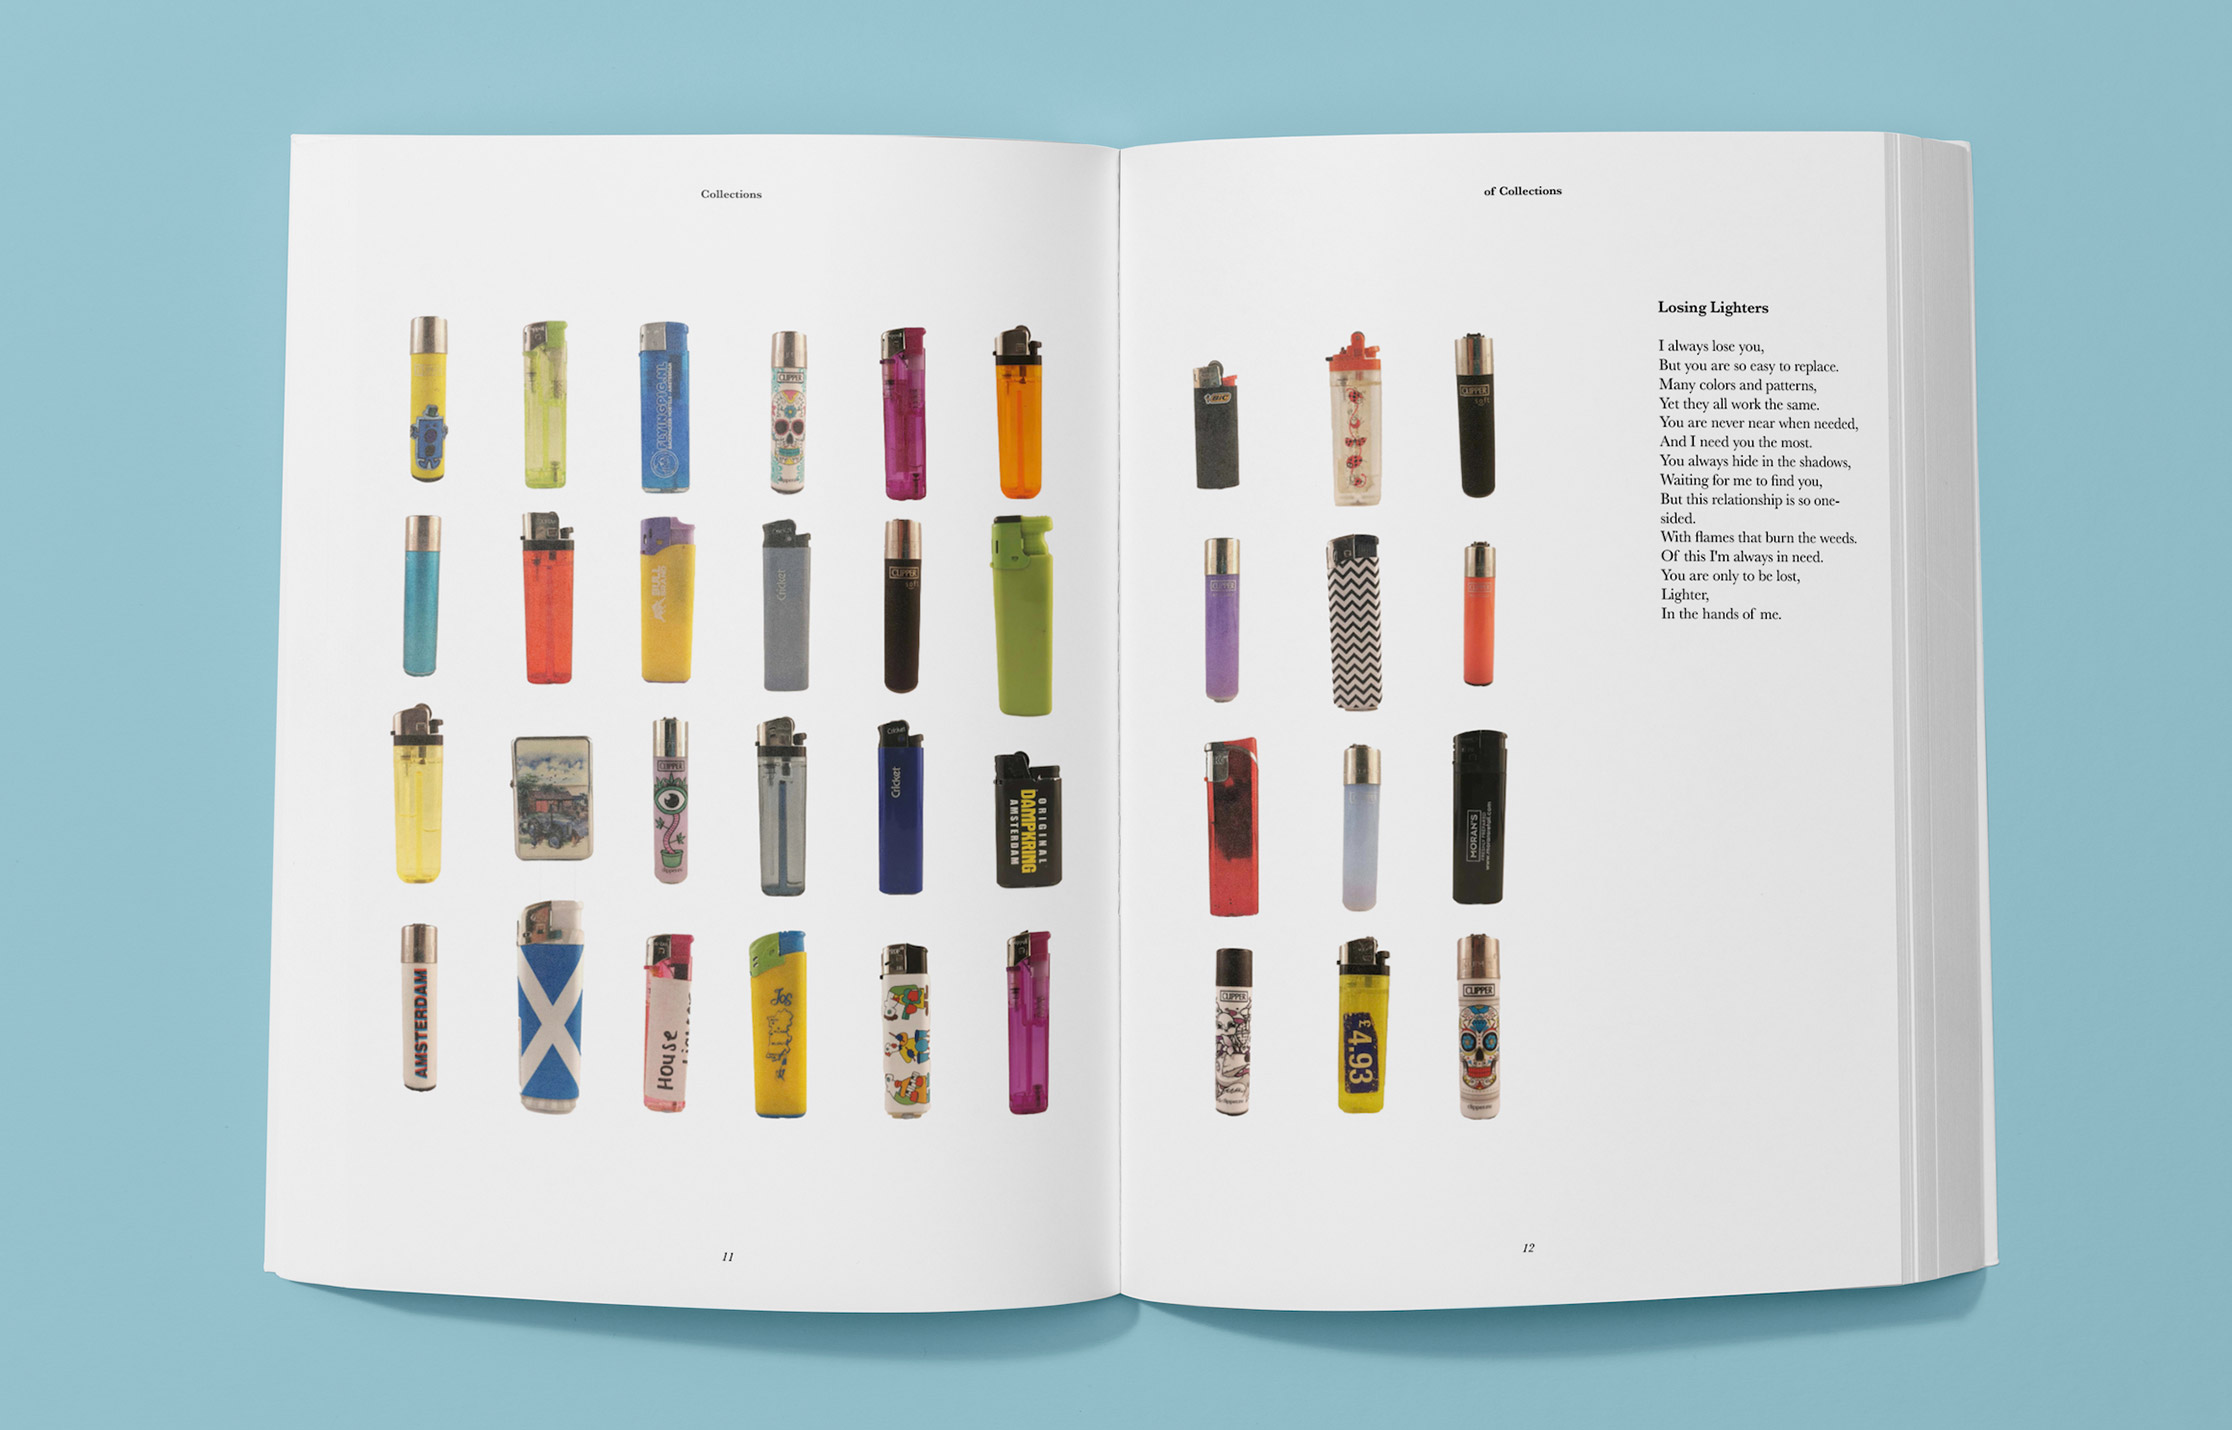 Mock-up print publication spreads featuring a collection of lighters